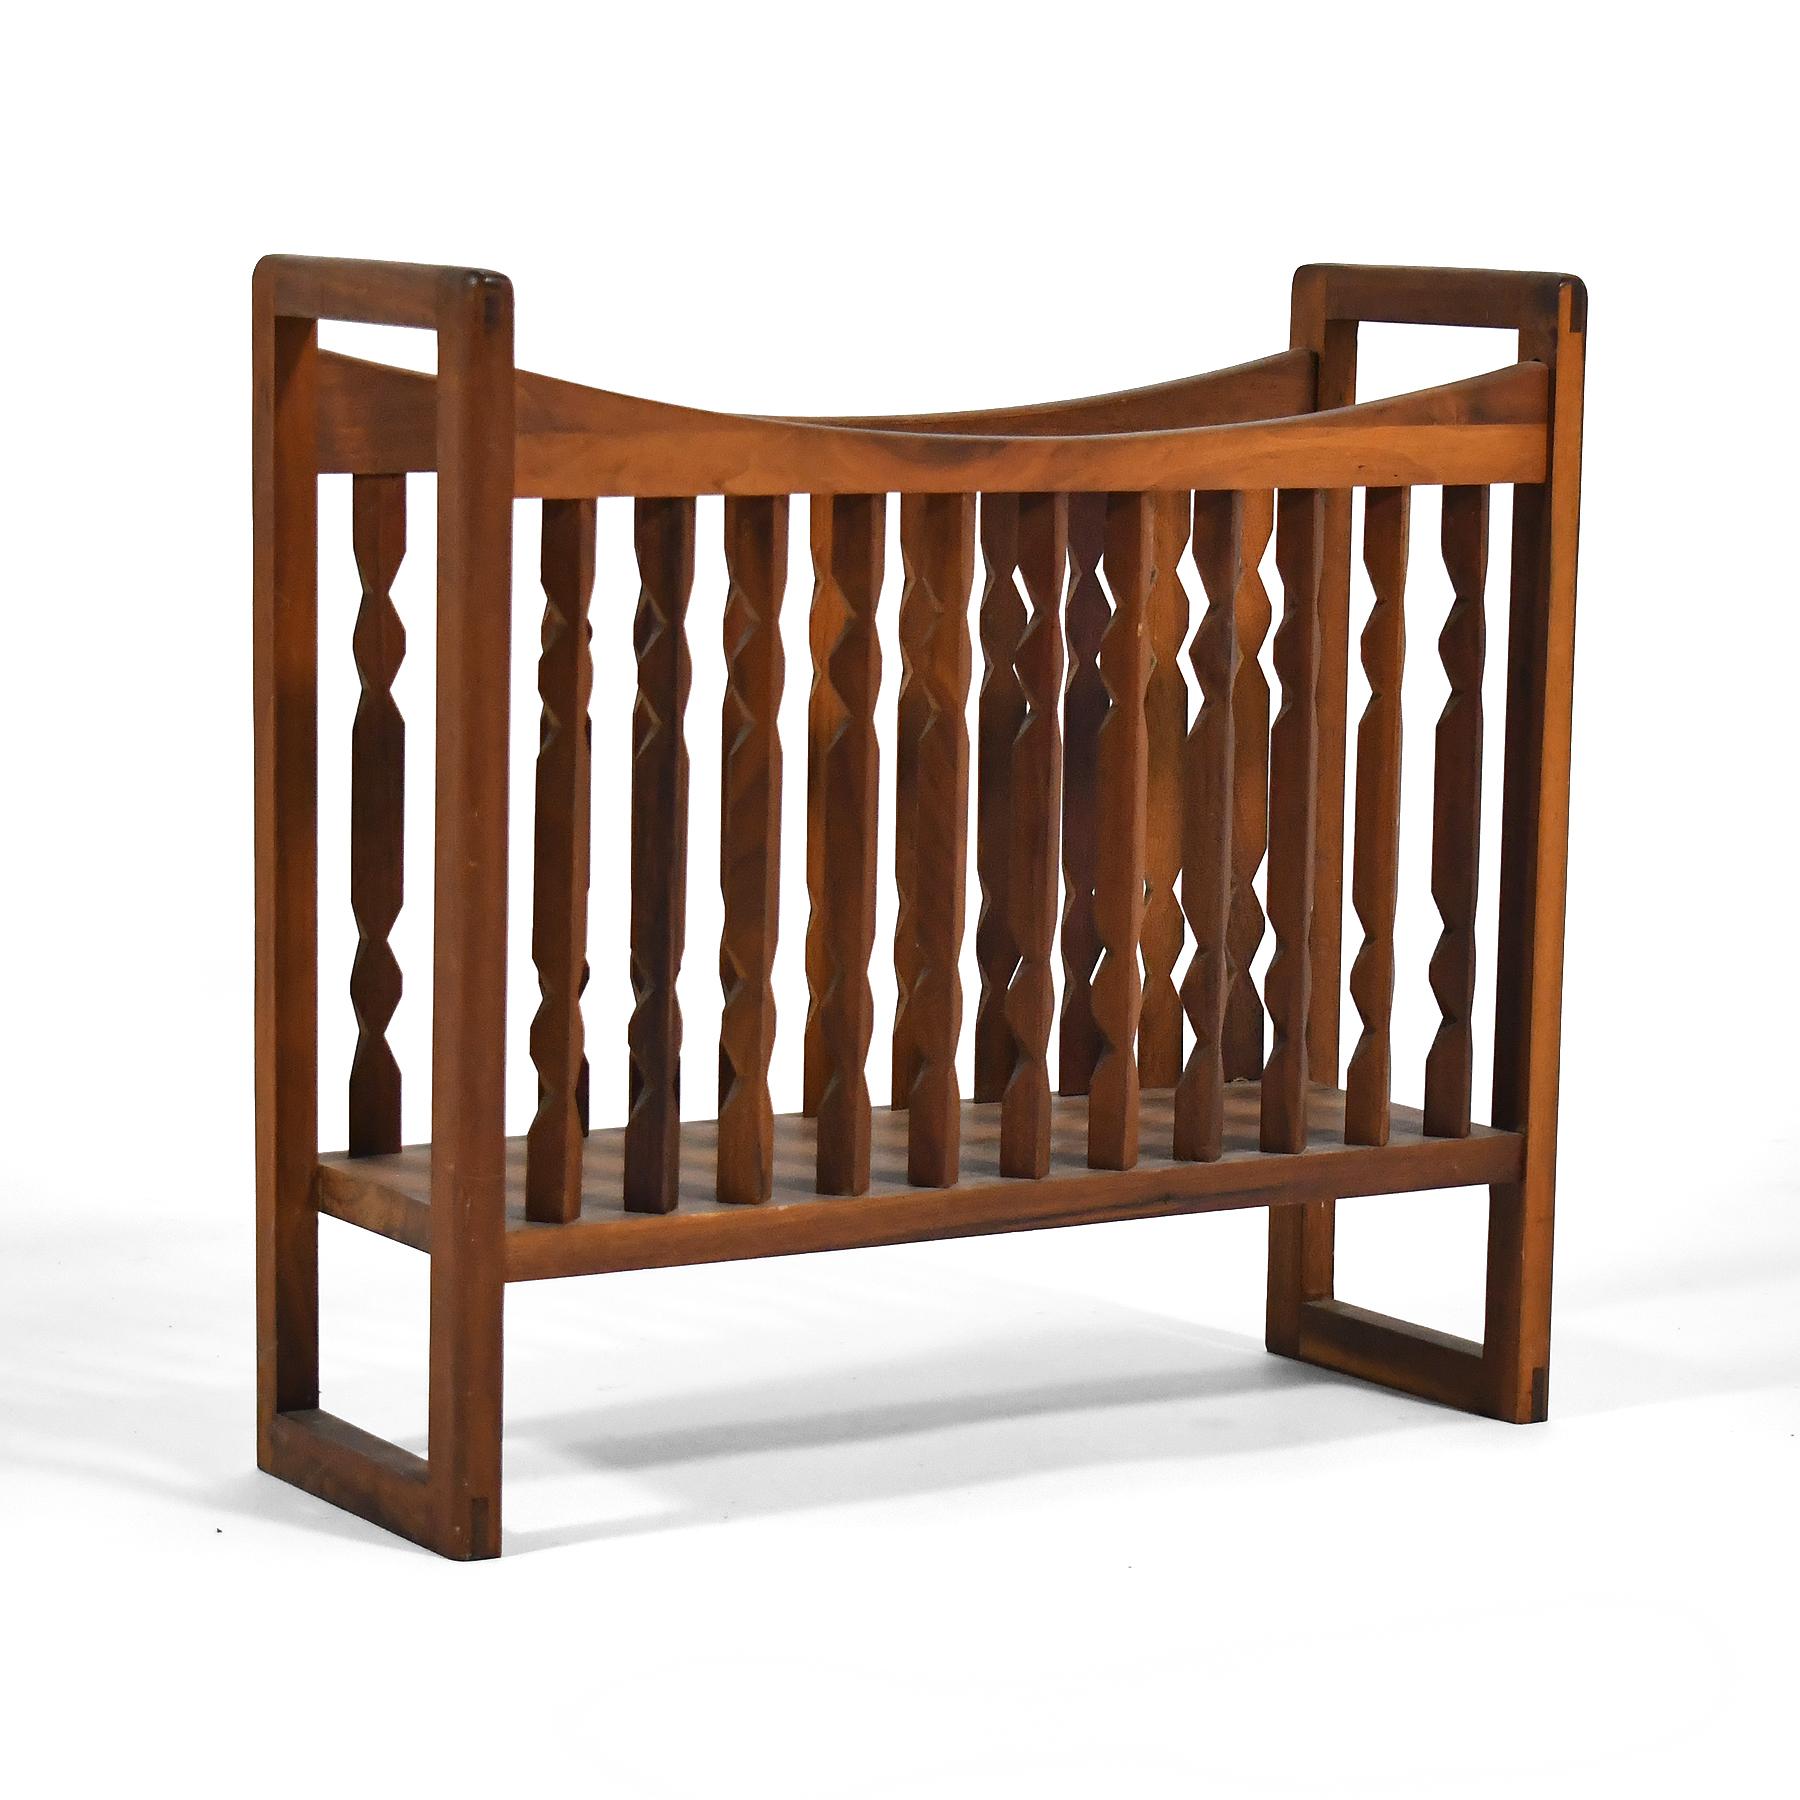 This lovely walnut magazine rack by Arthur Umanoff for Washington Woodcraft has sculptural spindles that create visual movement as your perspective on the piece changes.

18.5